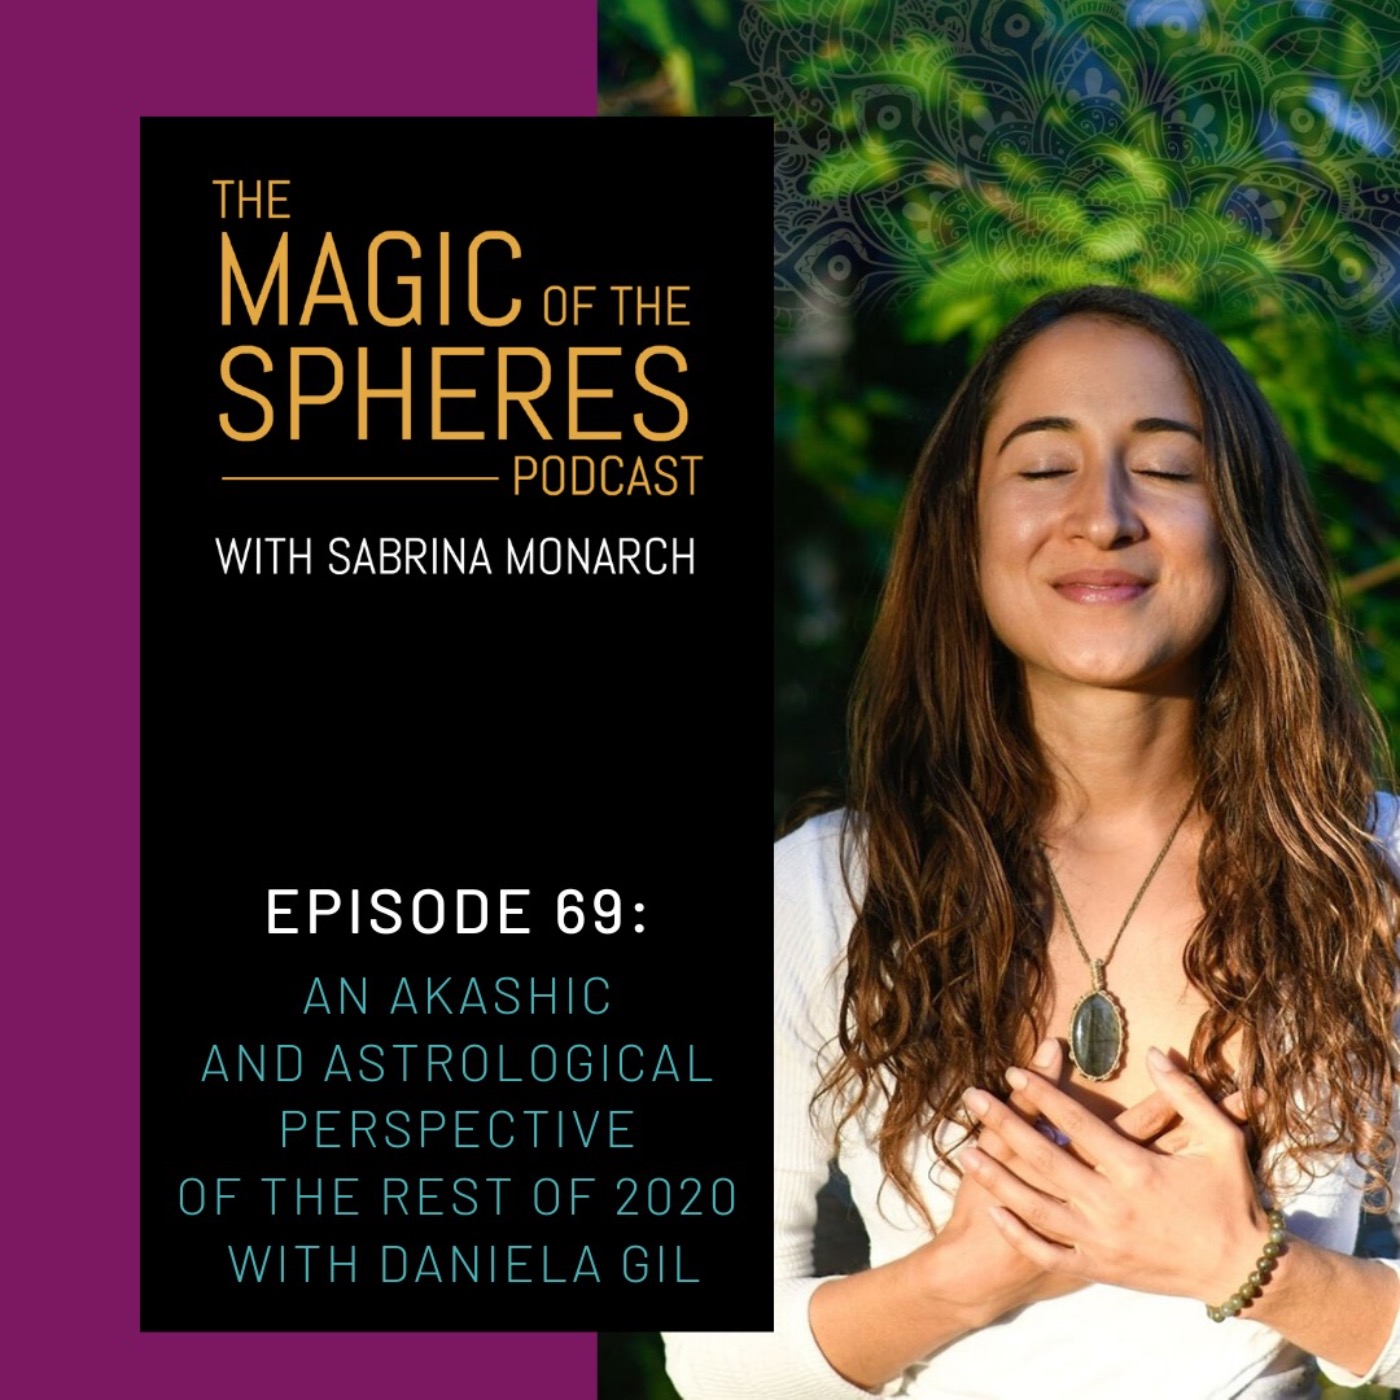 An Akashic and Astrological Perspective of the Rest of 2020 with Daniela Gil